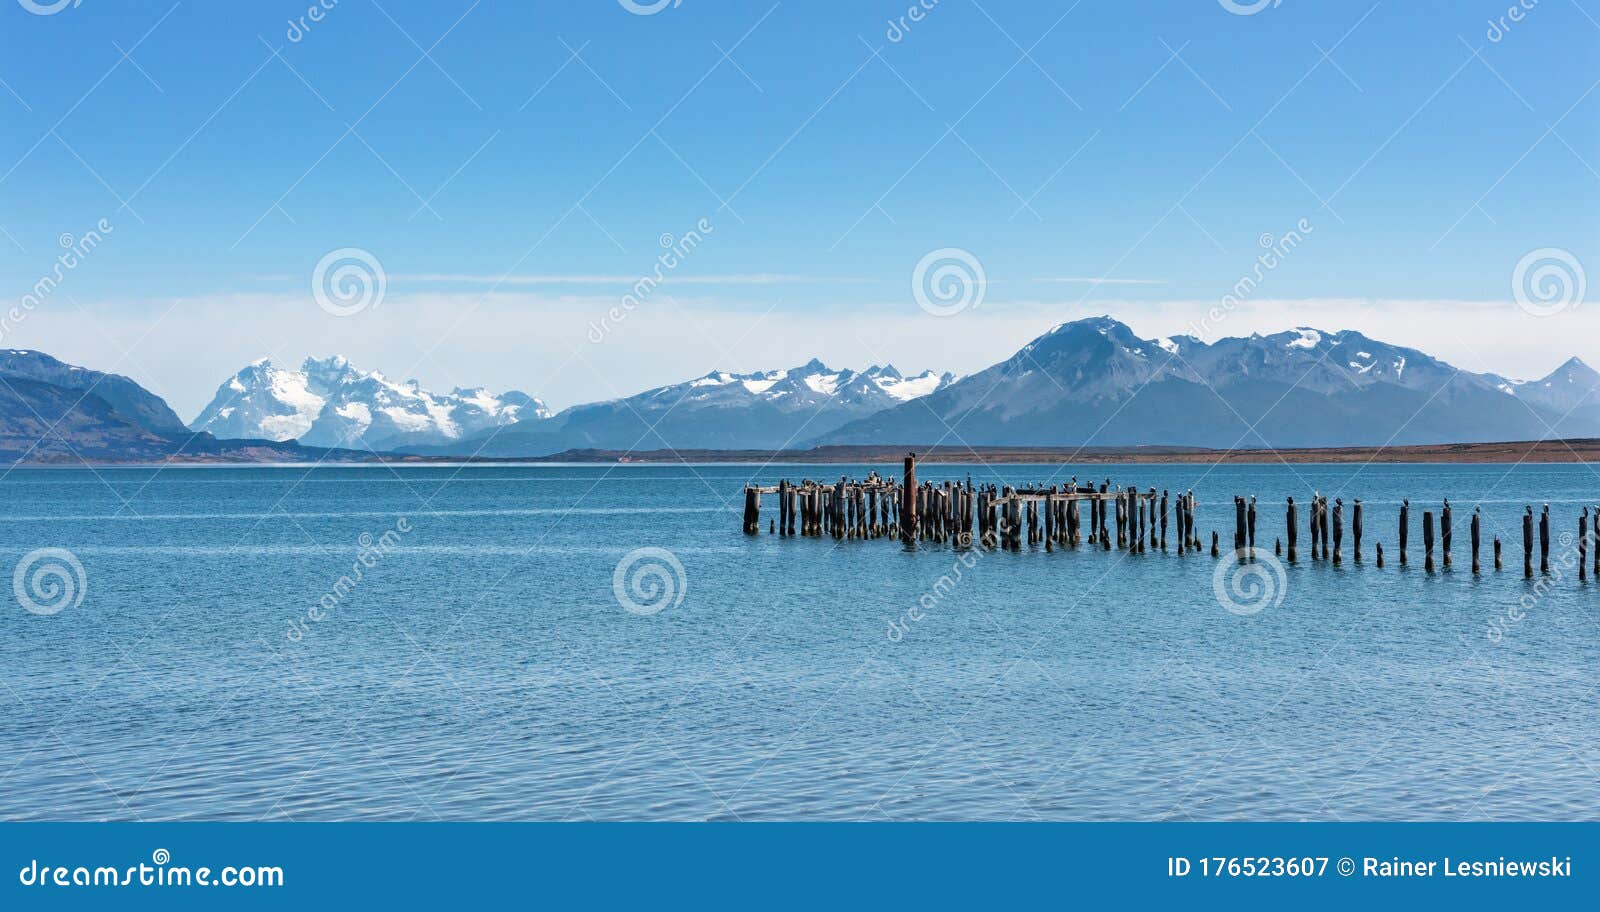 old jetty with king cormorants at ultima esperanza fjord near puerto natales, patagonia, chile